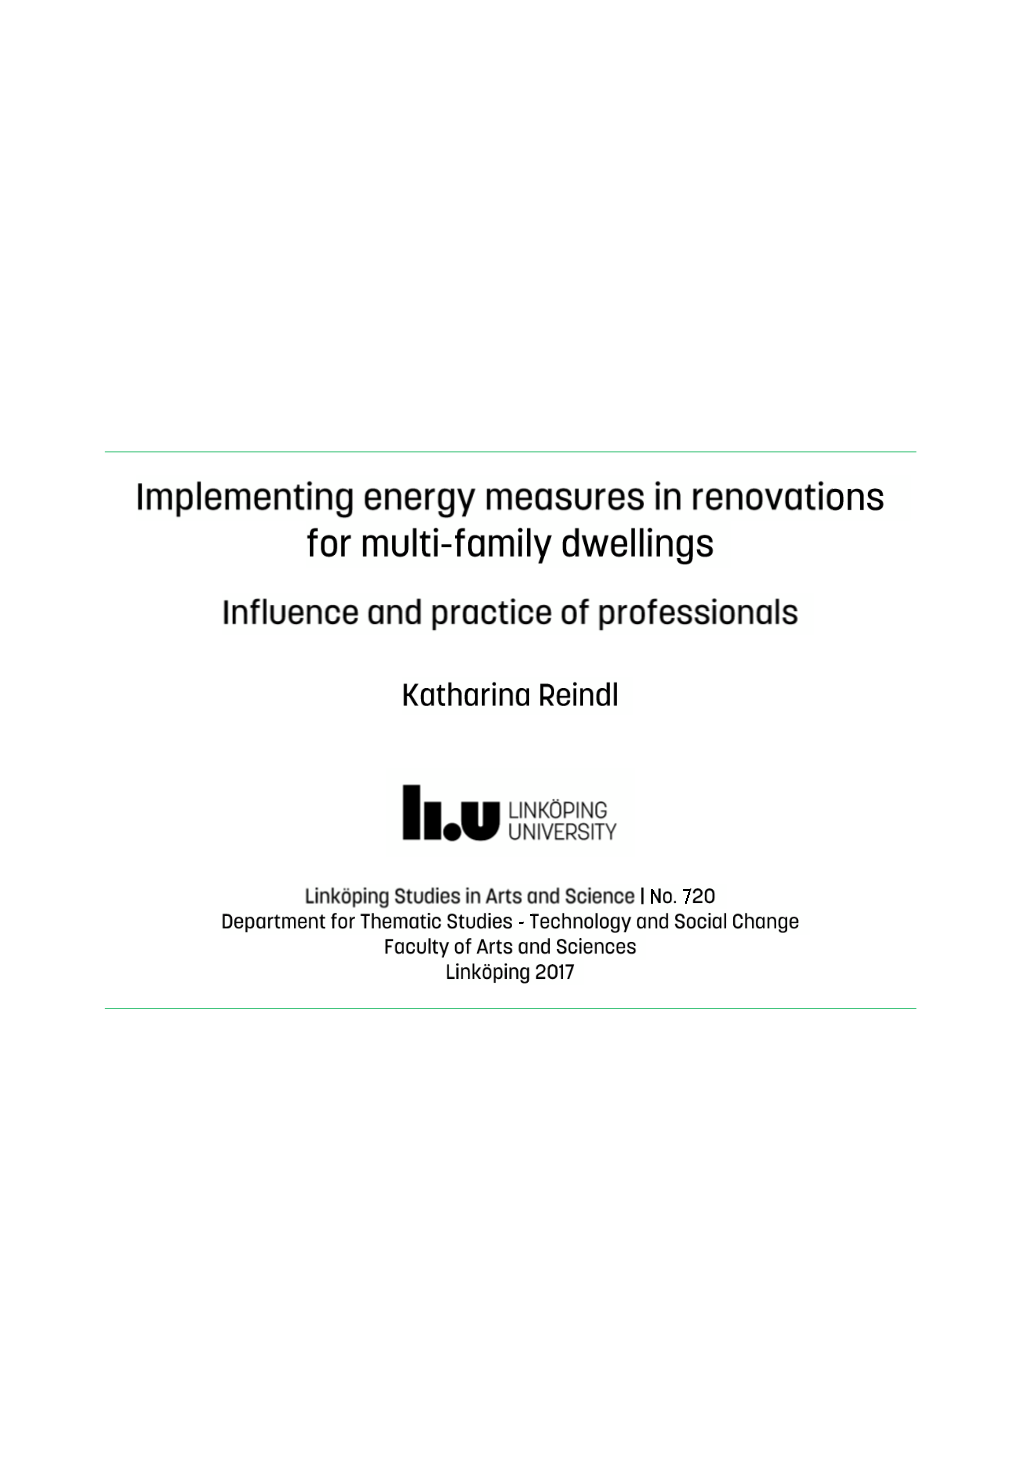 Implementing Energy Measures in Renovations for Multifamily Dwellings